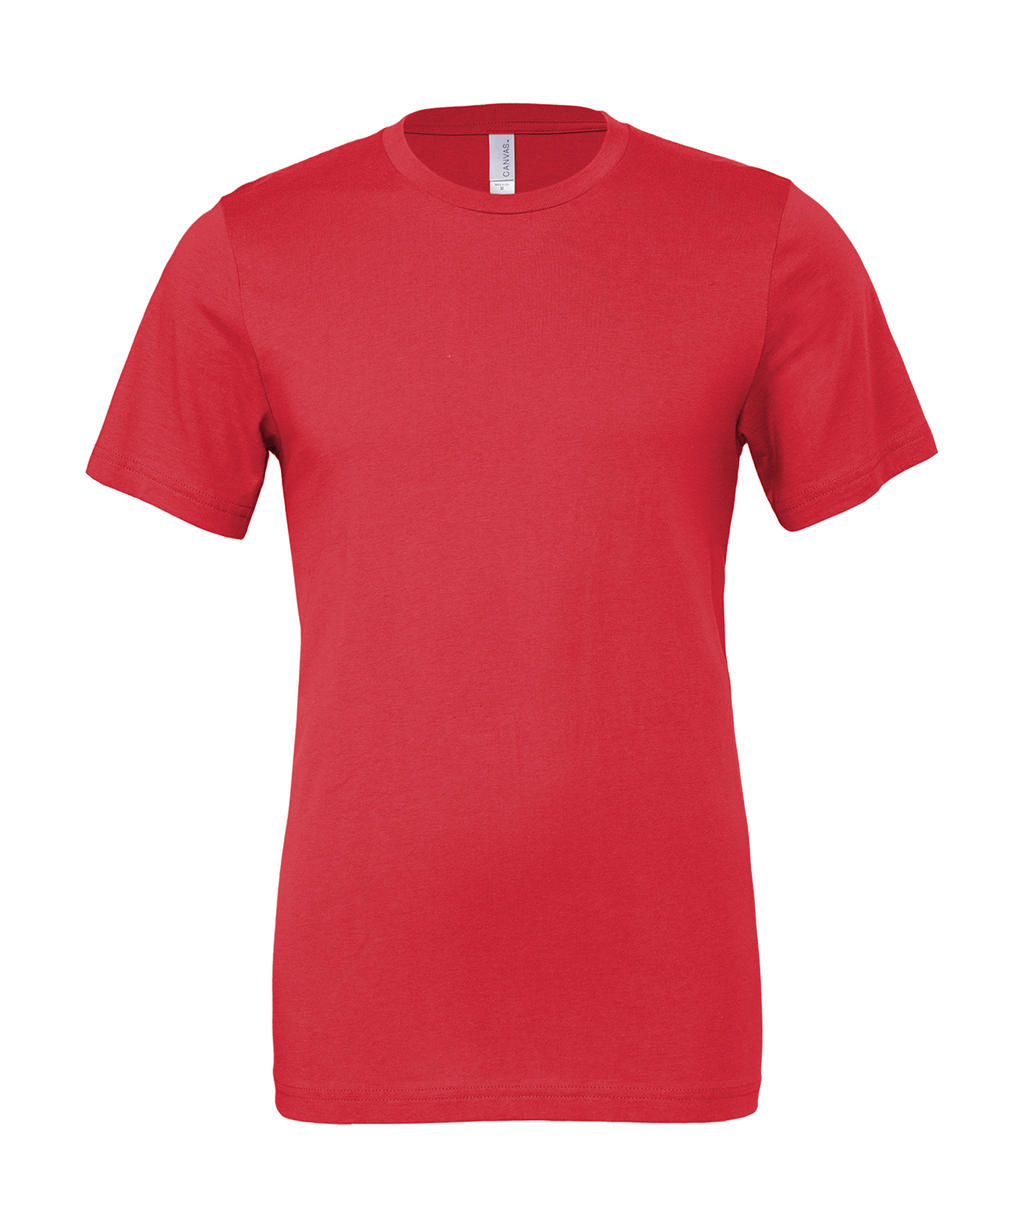  Unisex Jersey Short Sleeve Tee in Farbe Coral